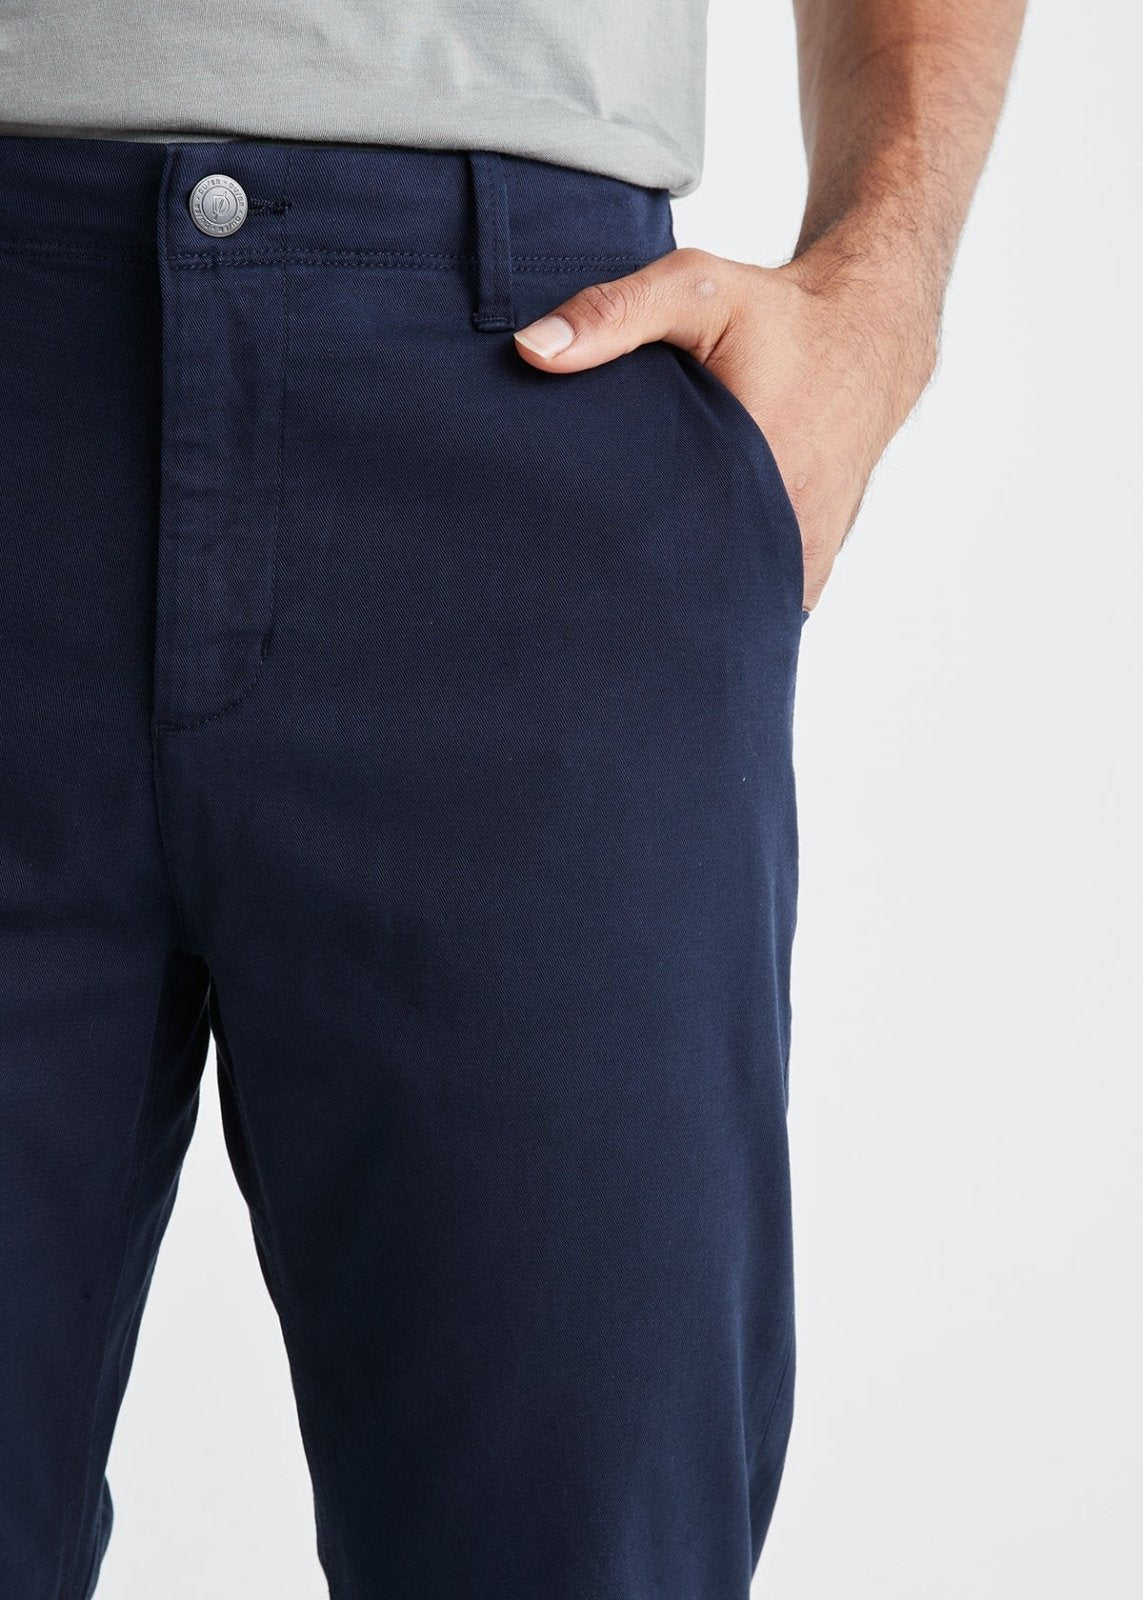 mens stretch deep blue chino pants front waistband detail